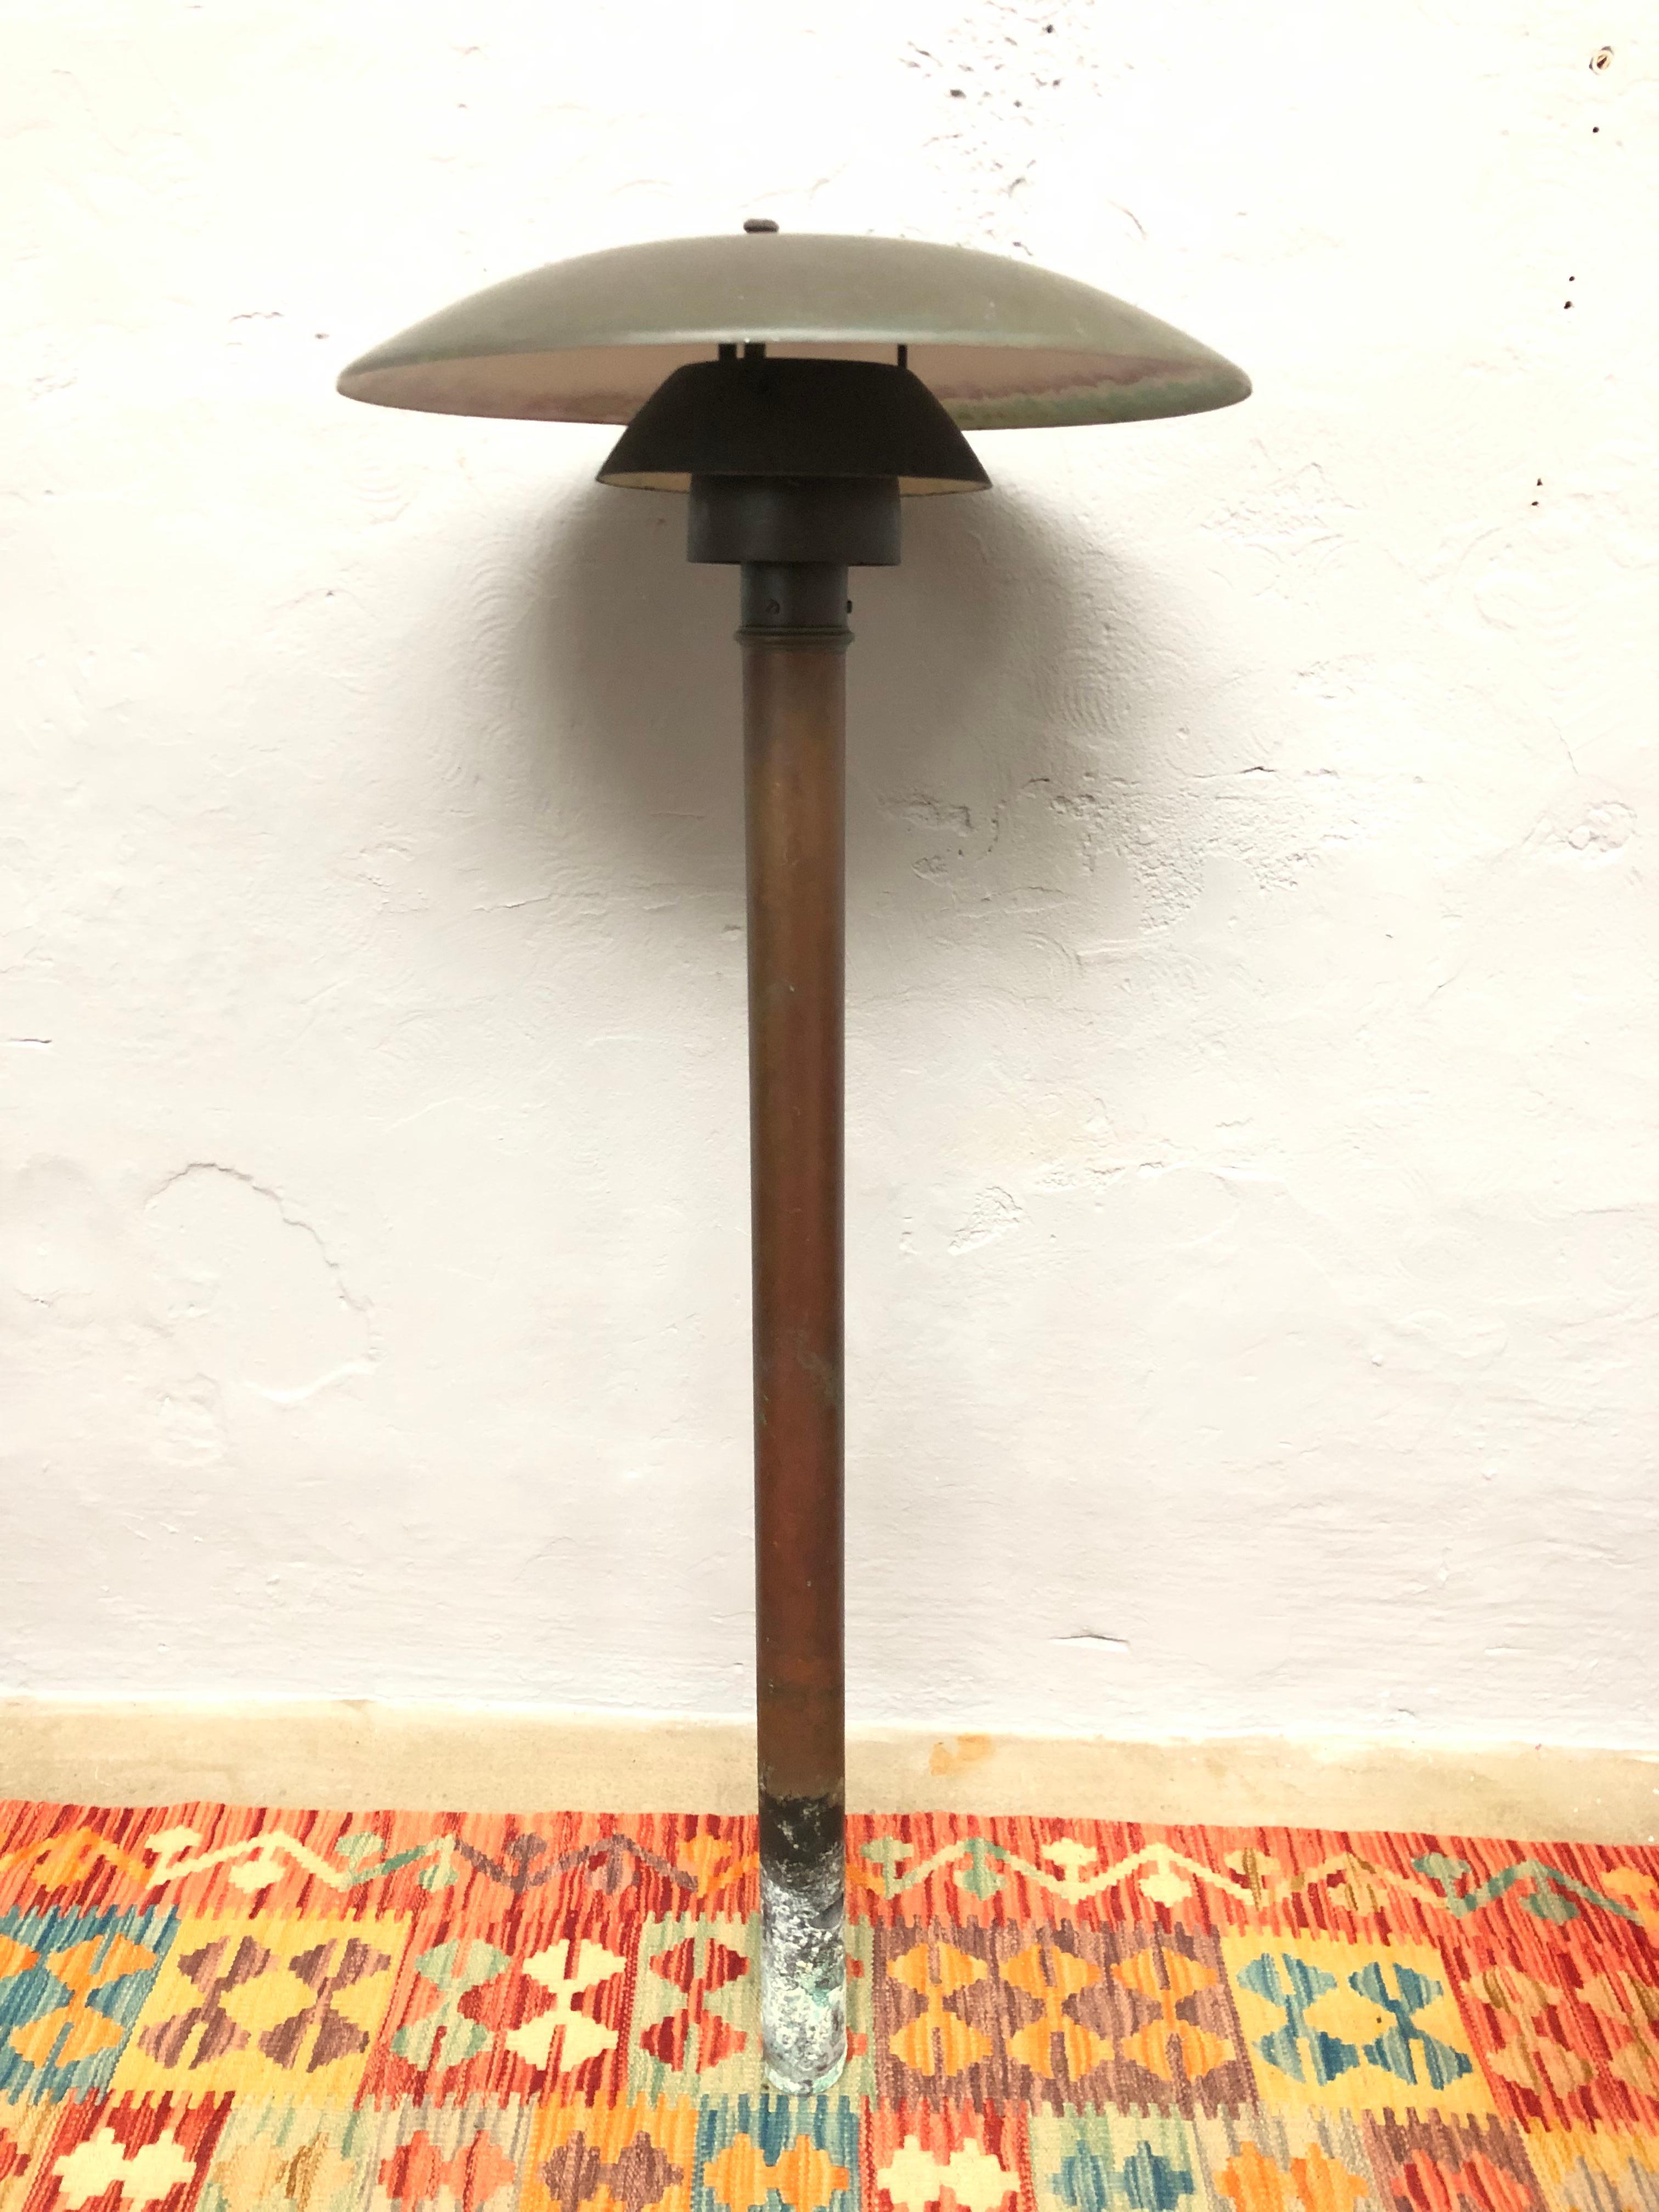 A rare iconic Poul Henningsen copper garden lamp PH 4.5 made in Denmark by Louis Poulsen from the 1960s
This iconic lamp was first designed in 1966 and has been a Classic ever since
This lamps is in original condition with a lovely patina/verdigris